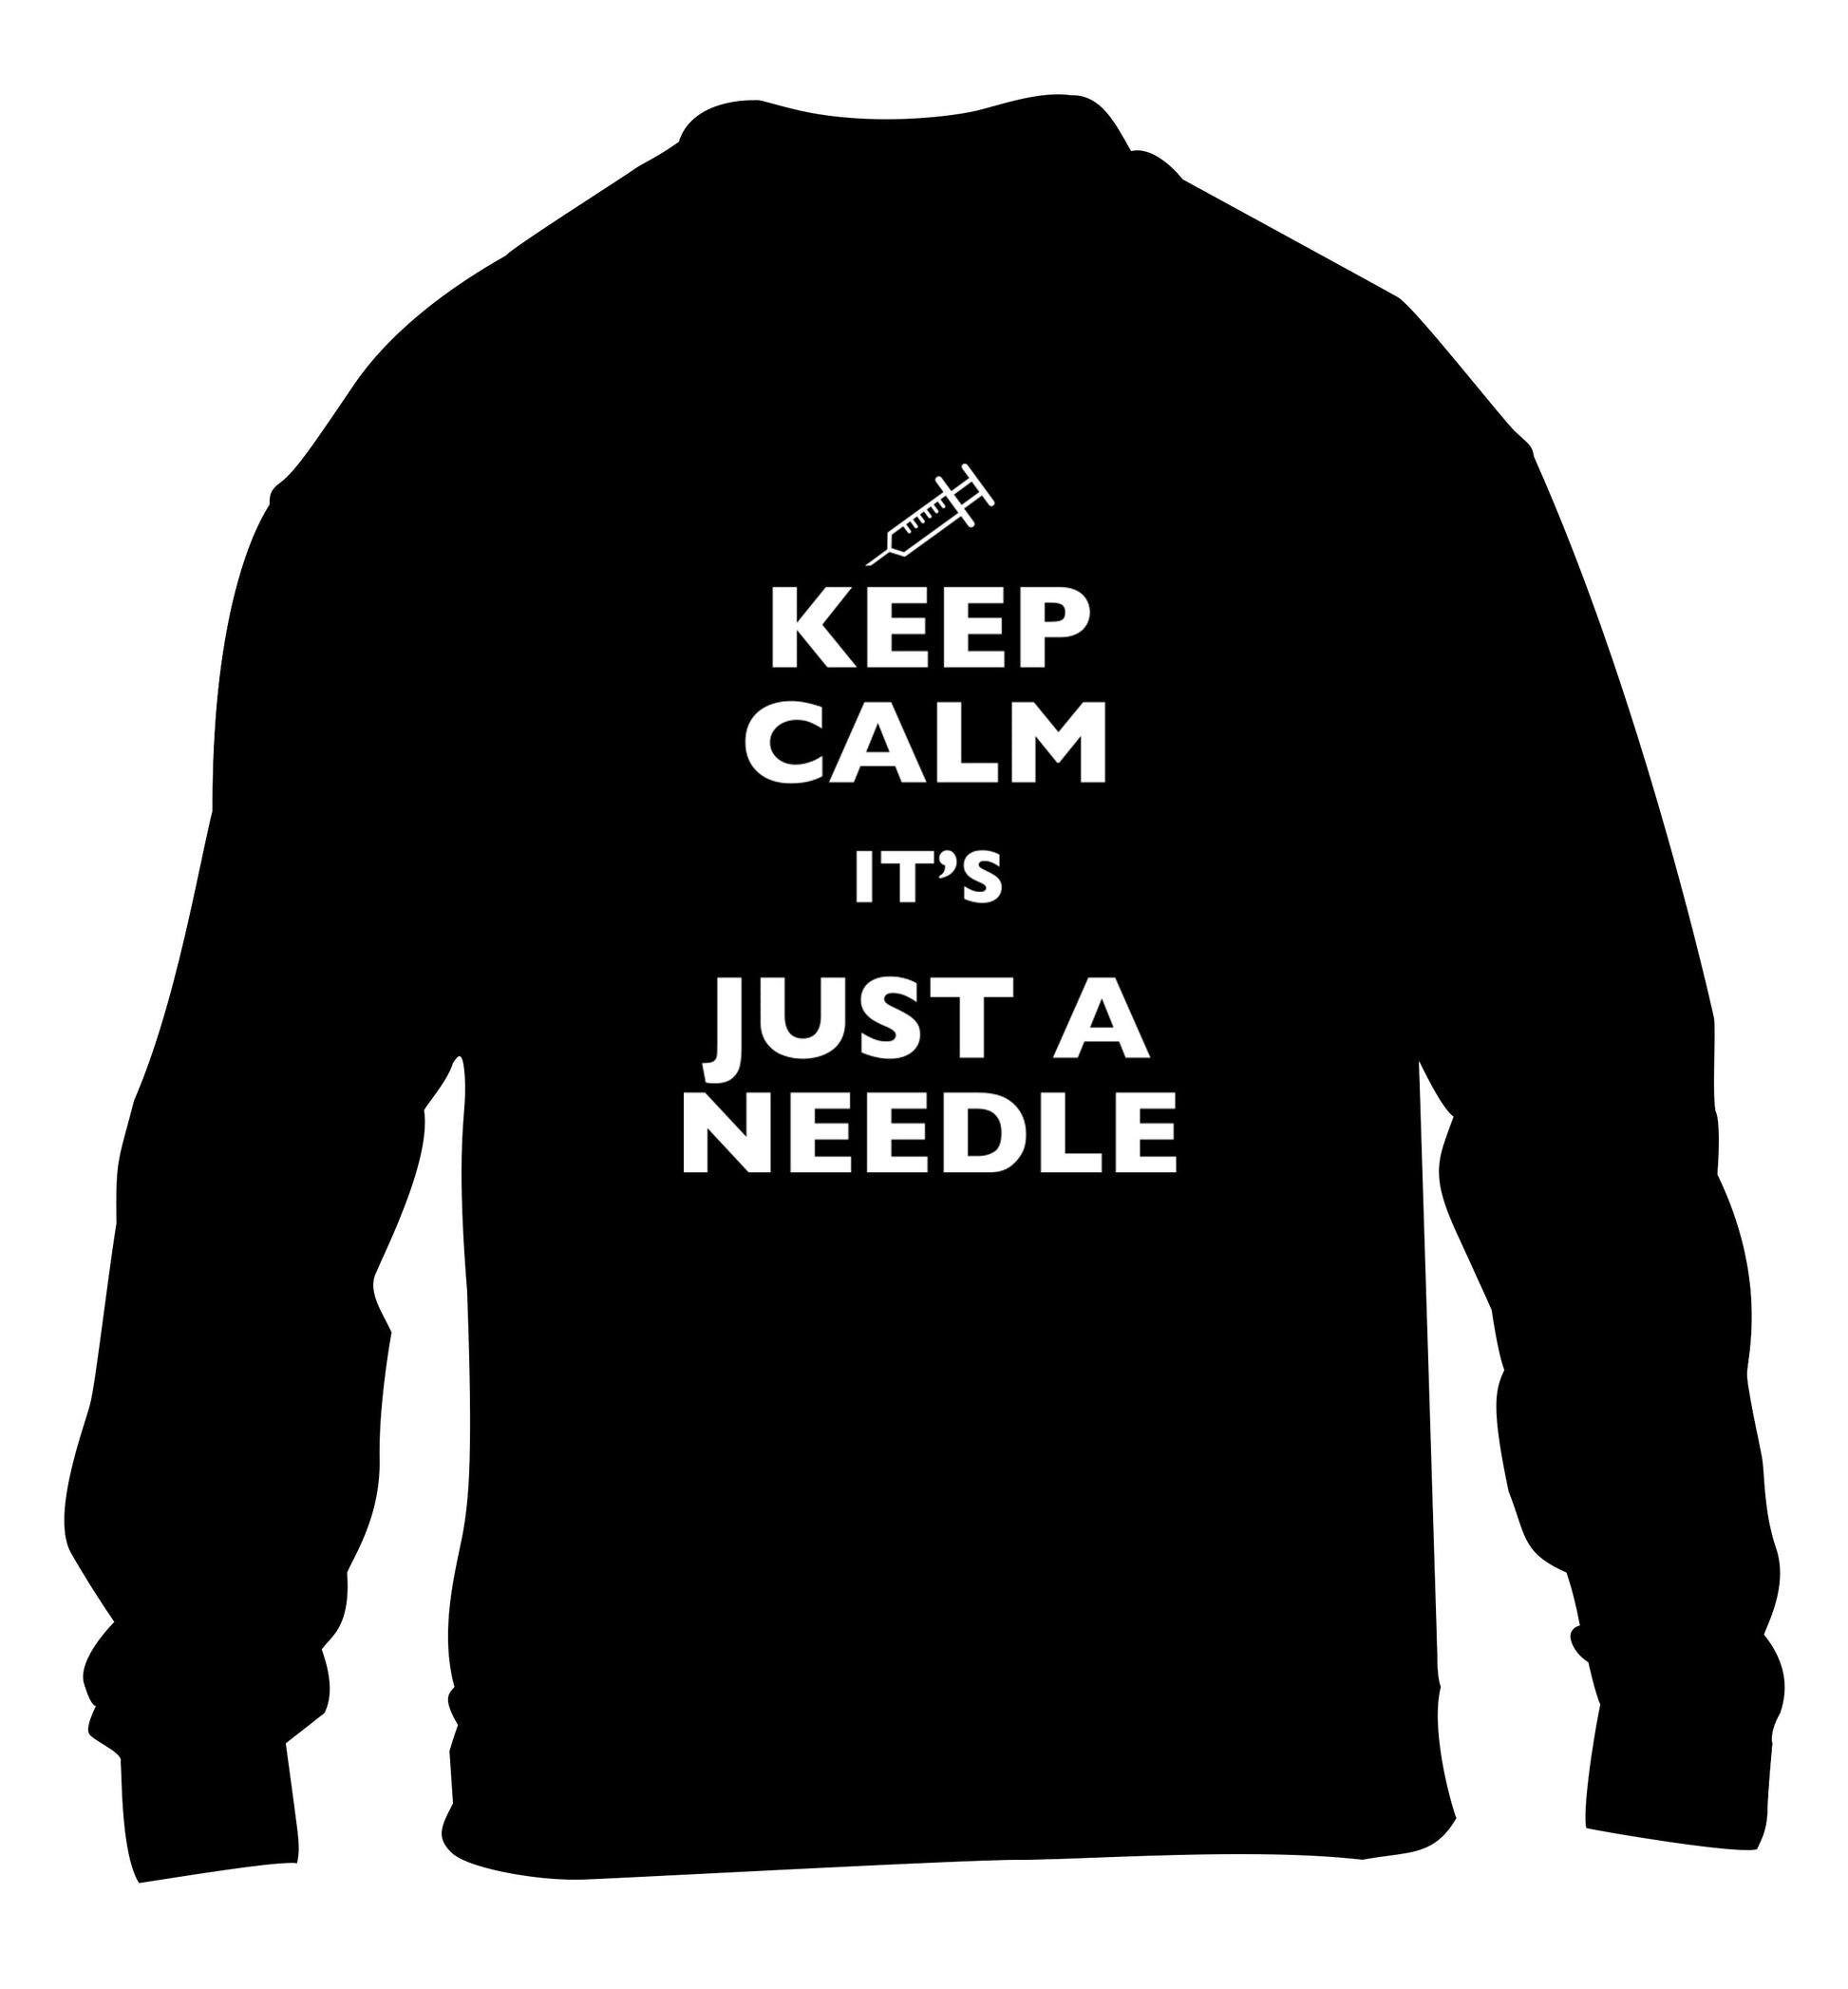 Keep calm it's only a needle children's black sweater 12-14 Years